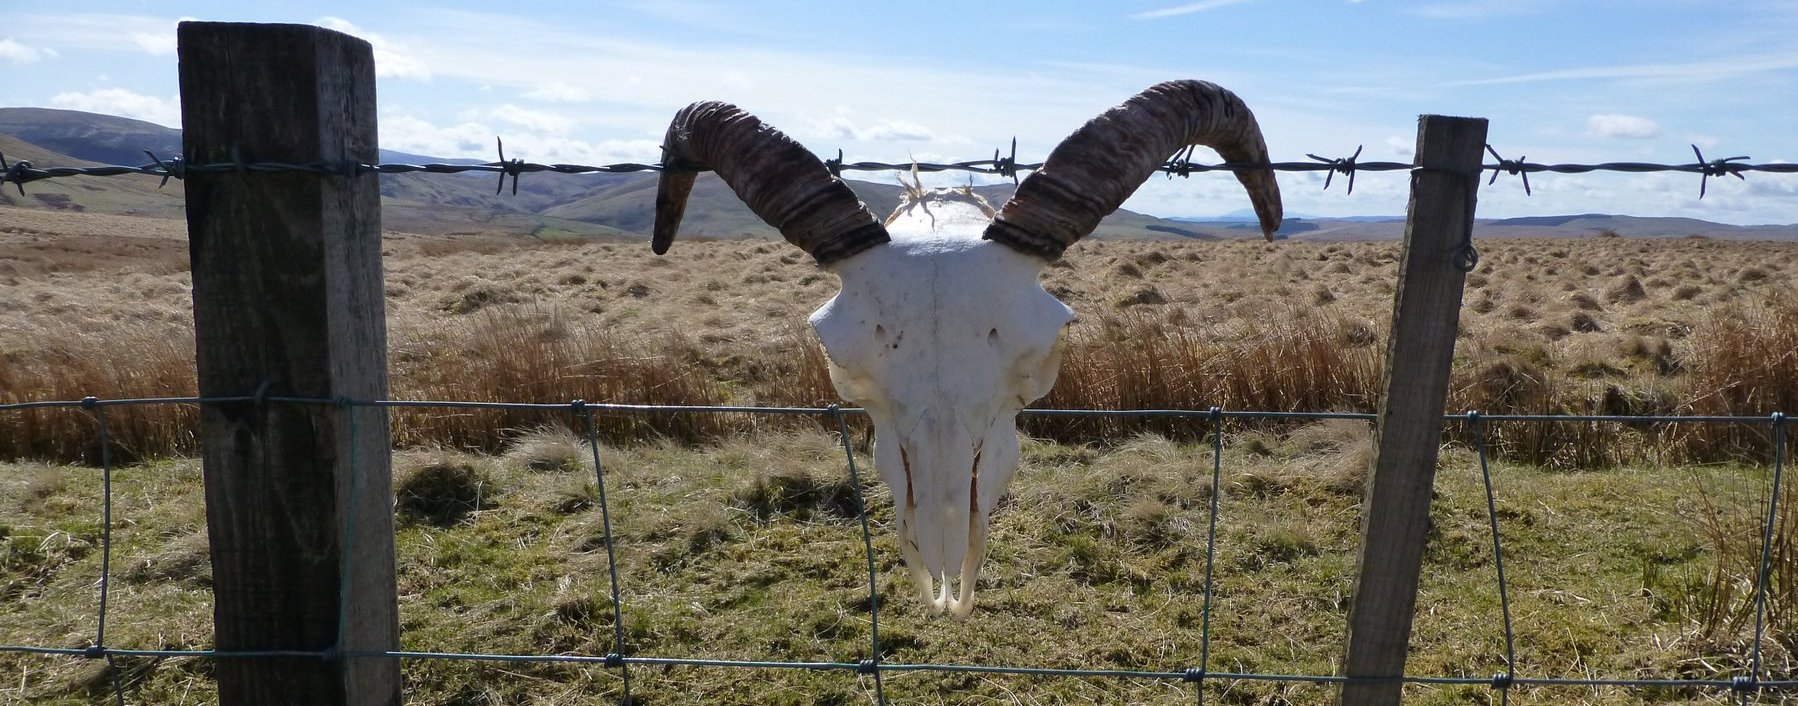 Interesting fence ornament on the way up Coupland Knowe